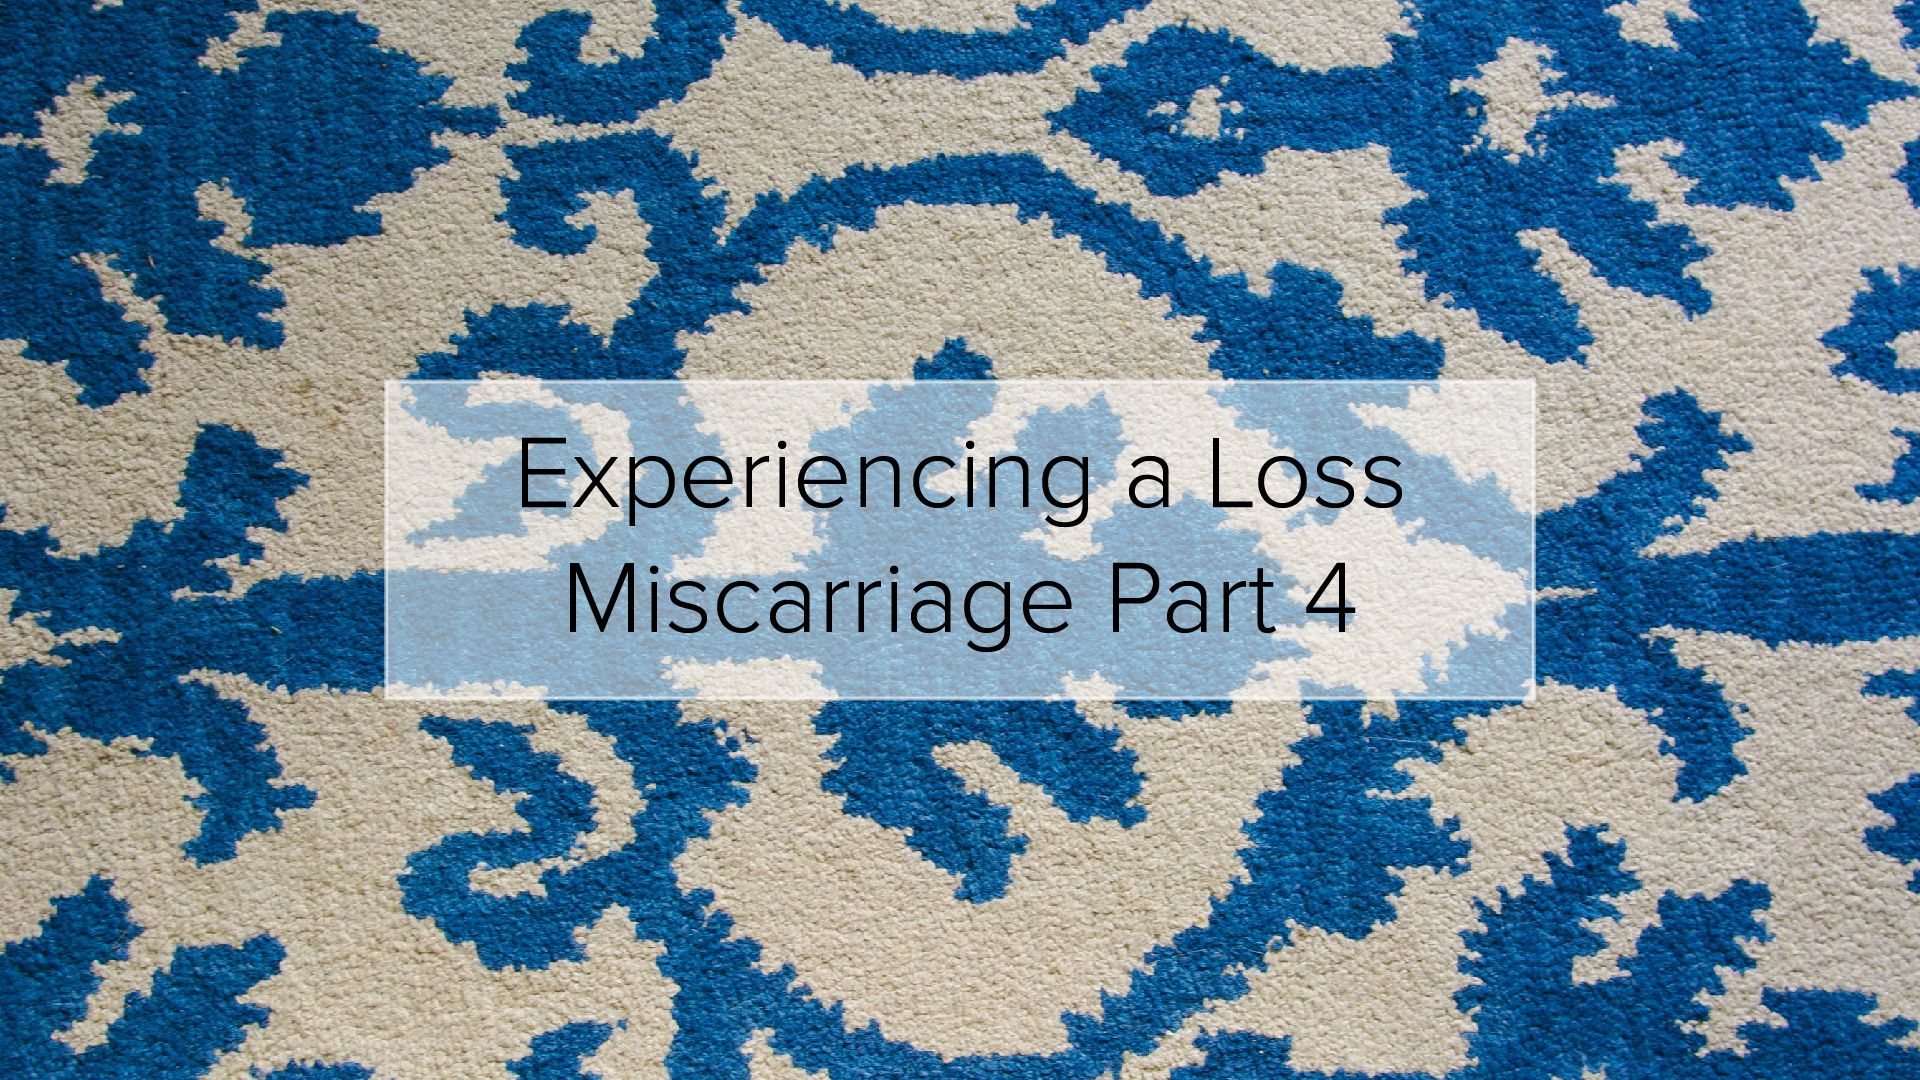 Miscarriage